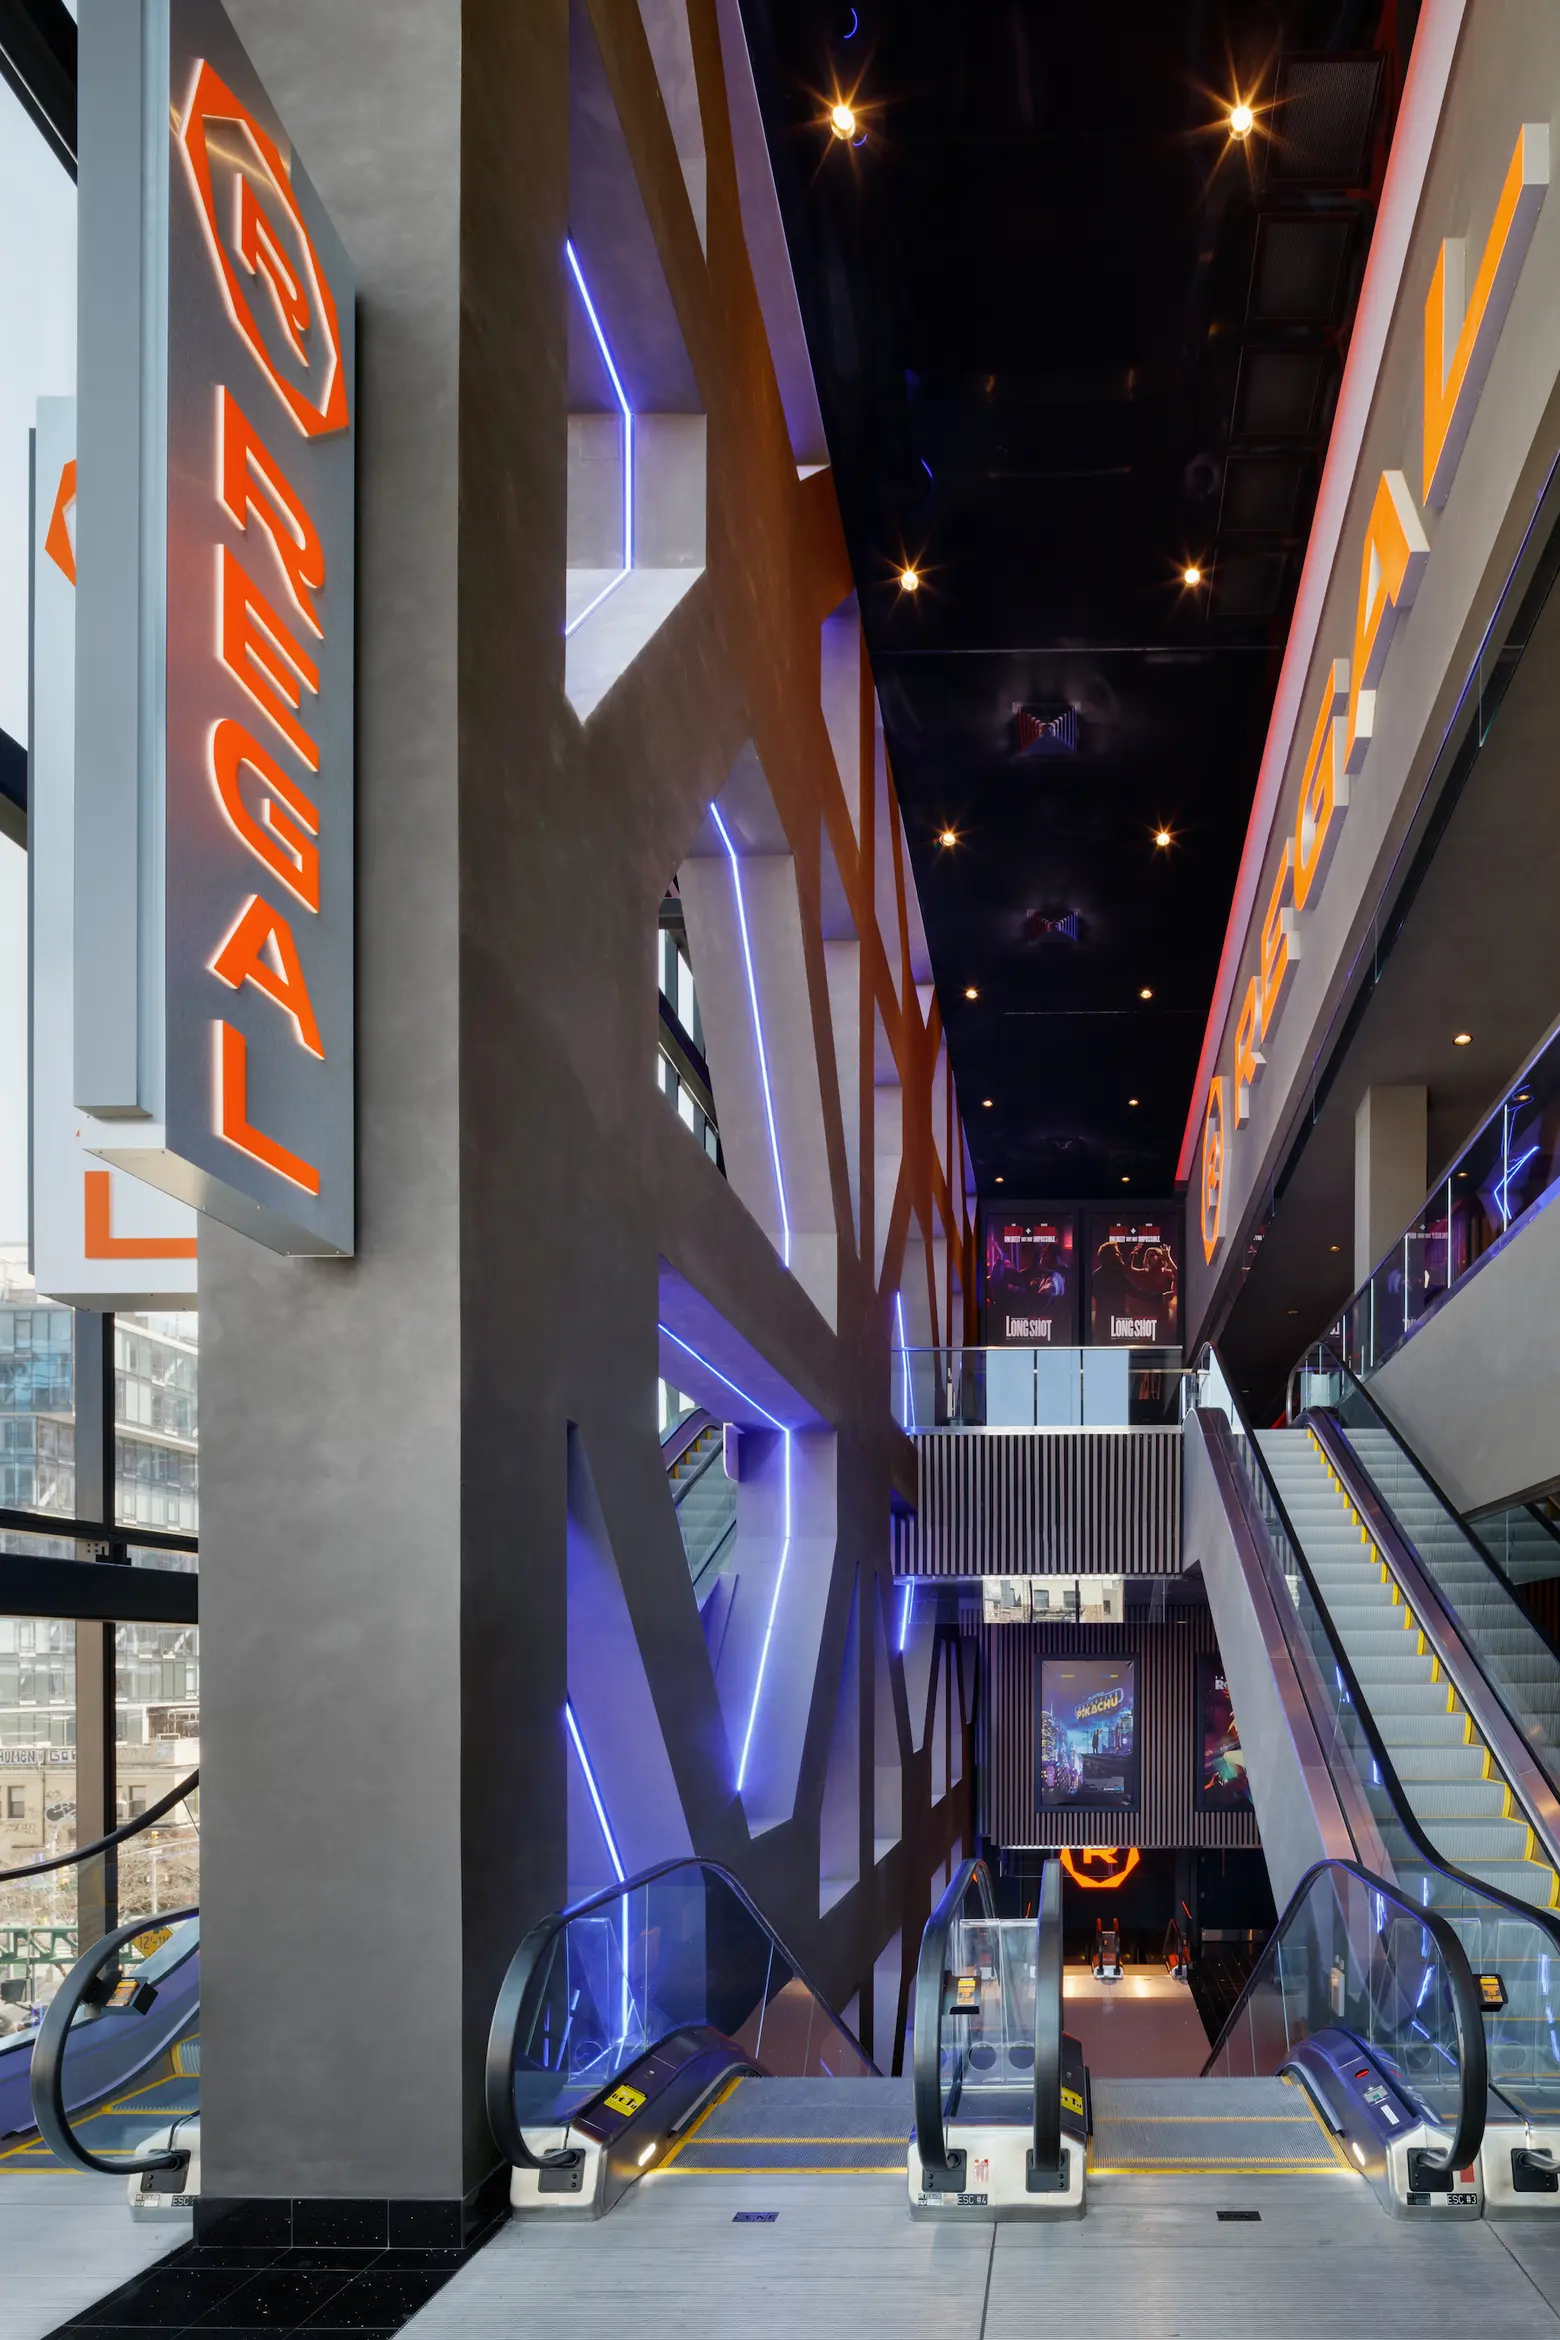 14-screen Regal theater opens at Essex Crossing on the Lower East